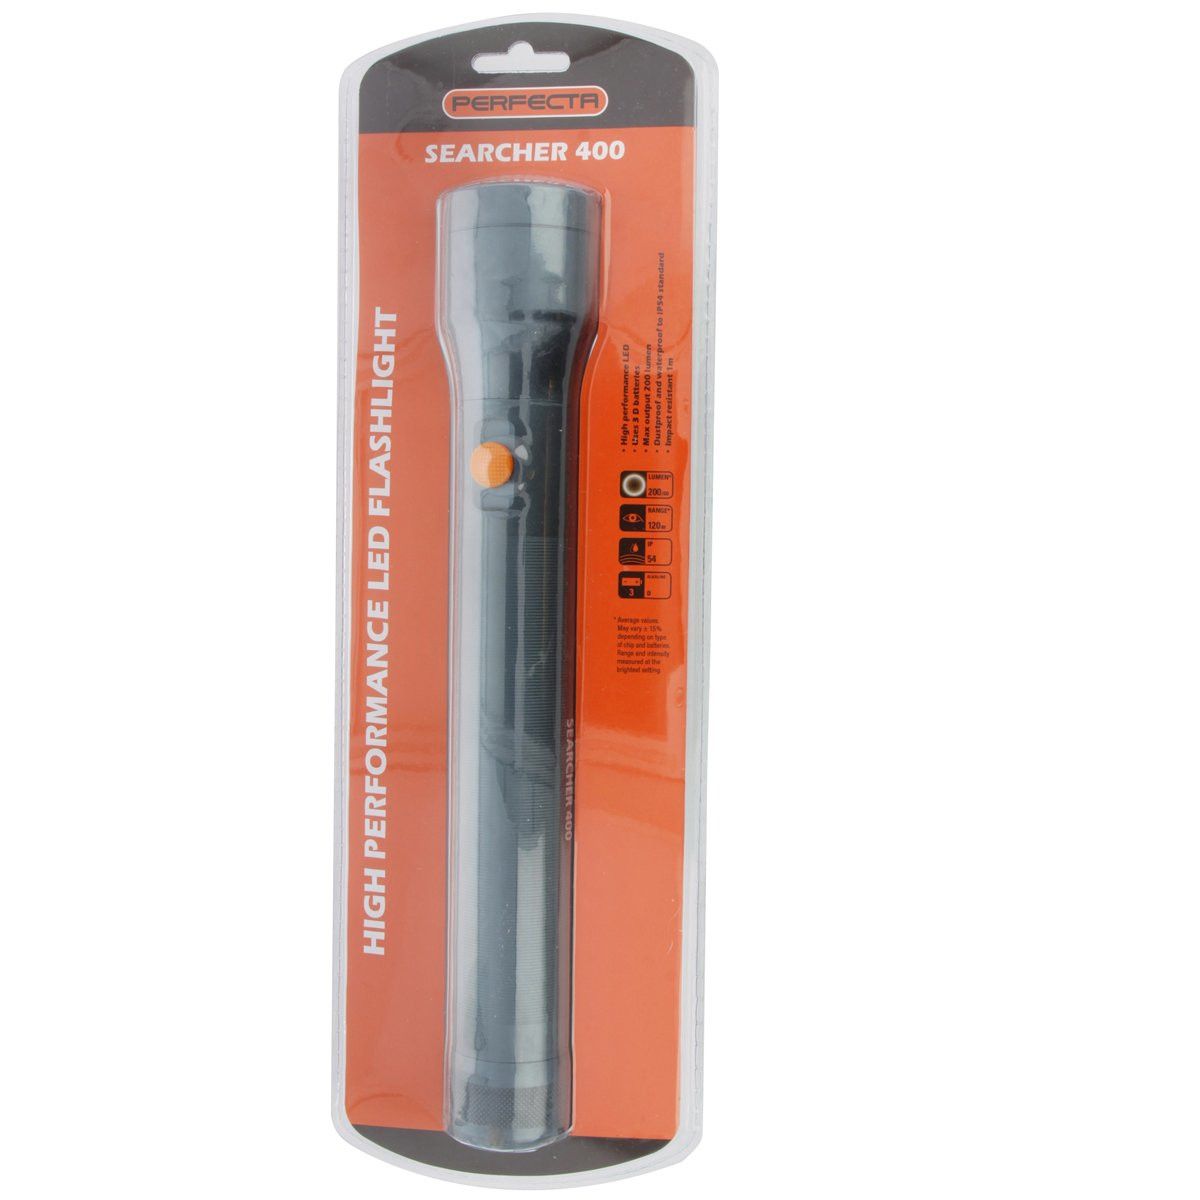 Umarex Perfecta Searcher 400 High Performance LED Torch